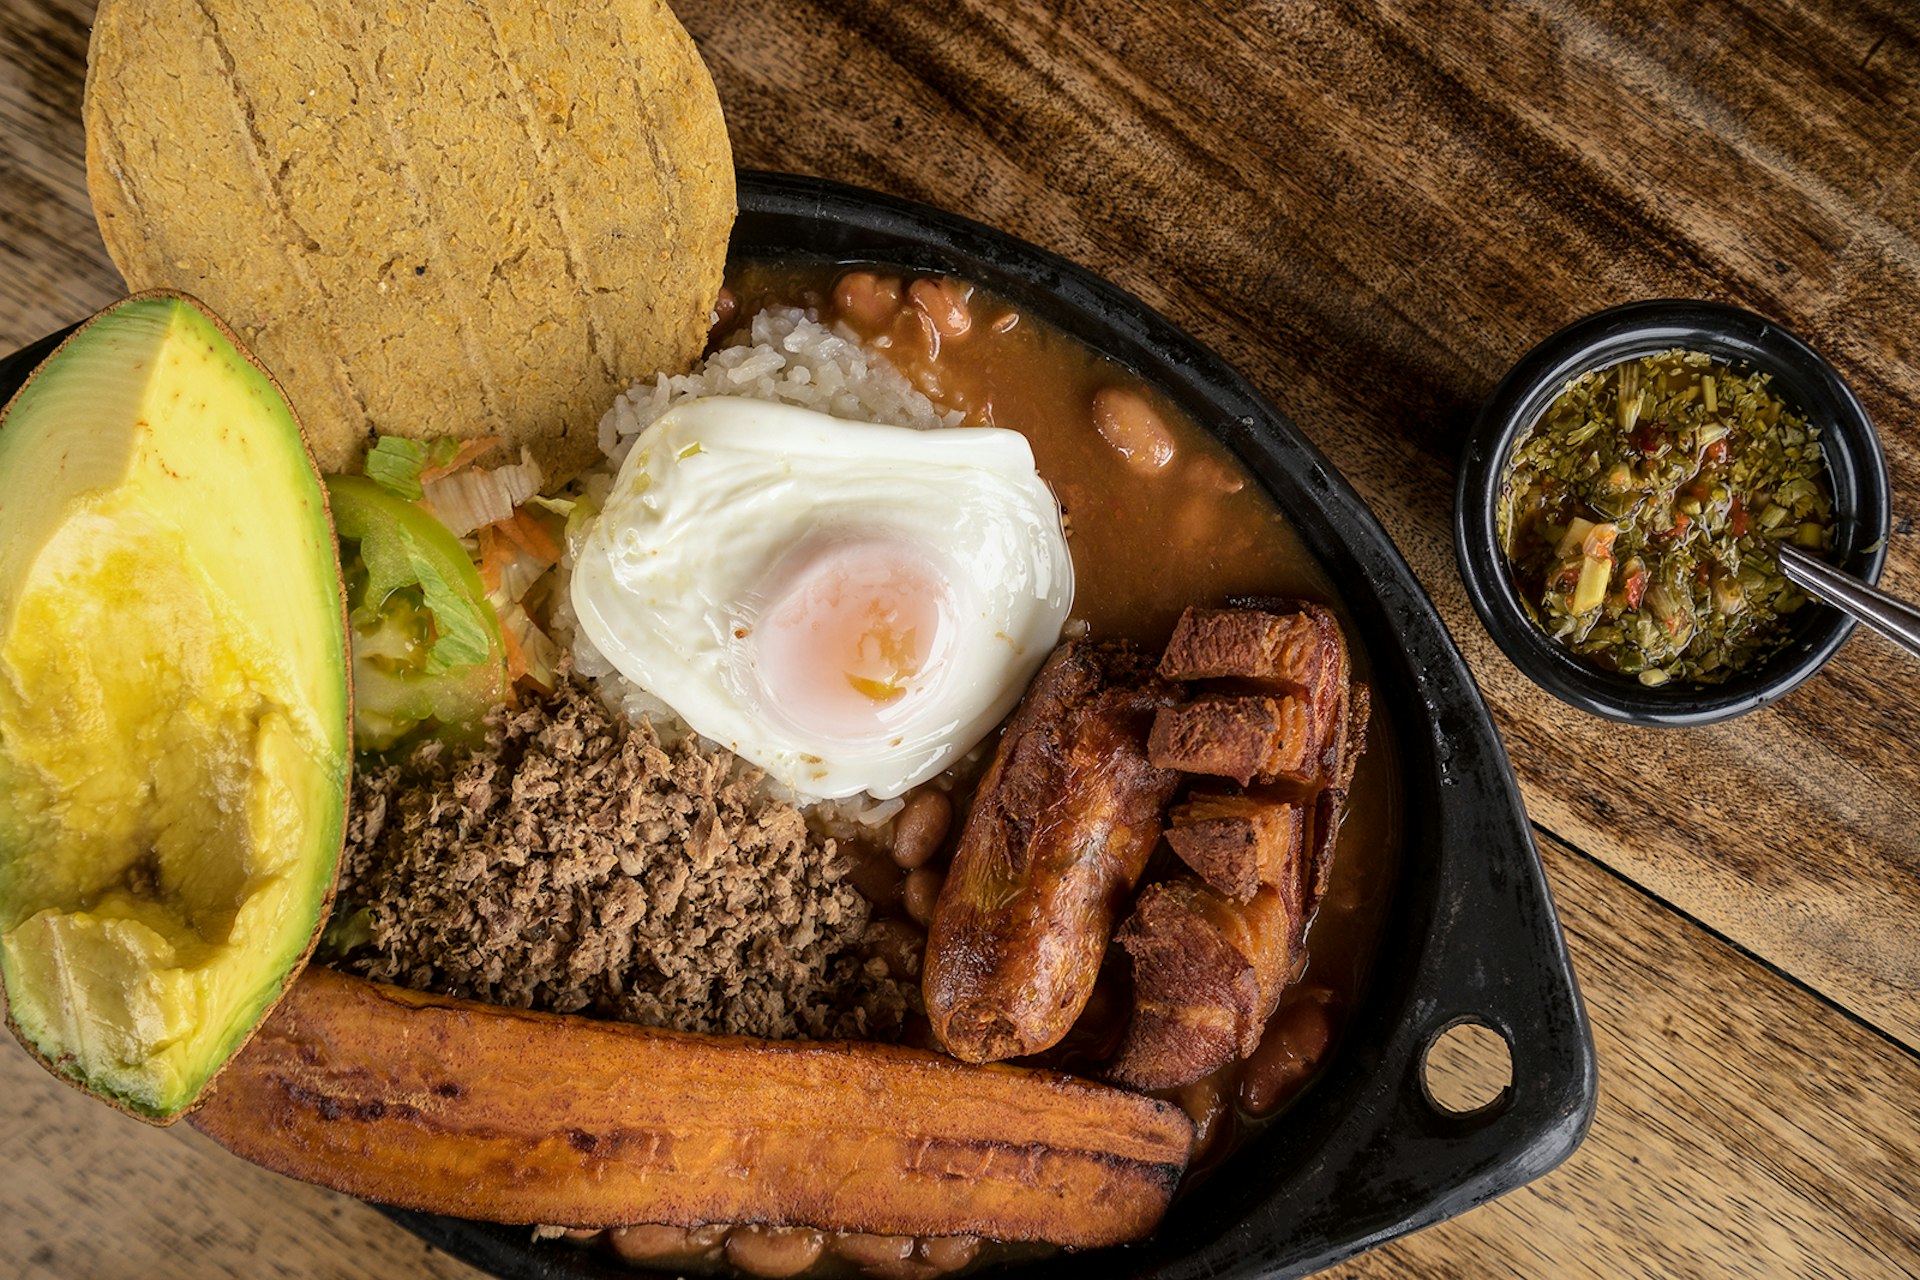 A plate of food with an egg, avocado, plantains, ground beef, arepas, beans and sausage.